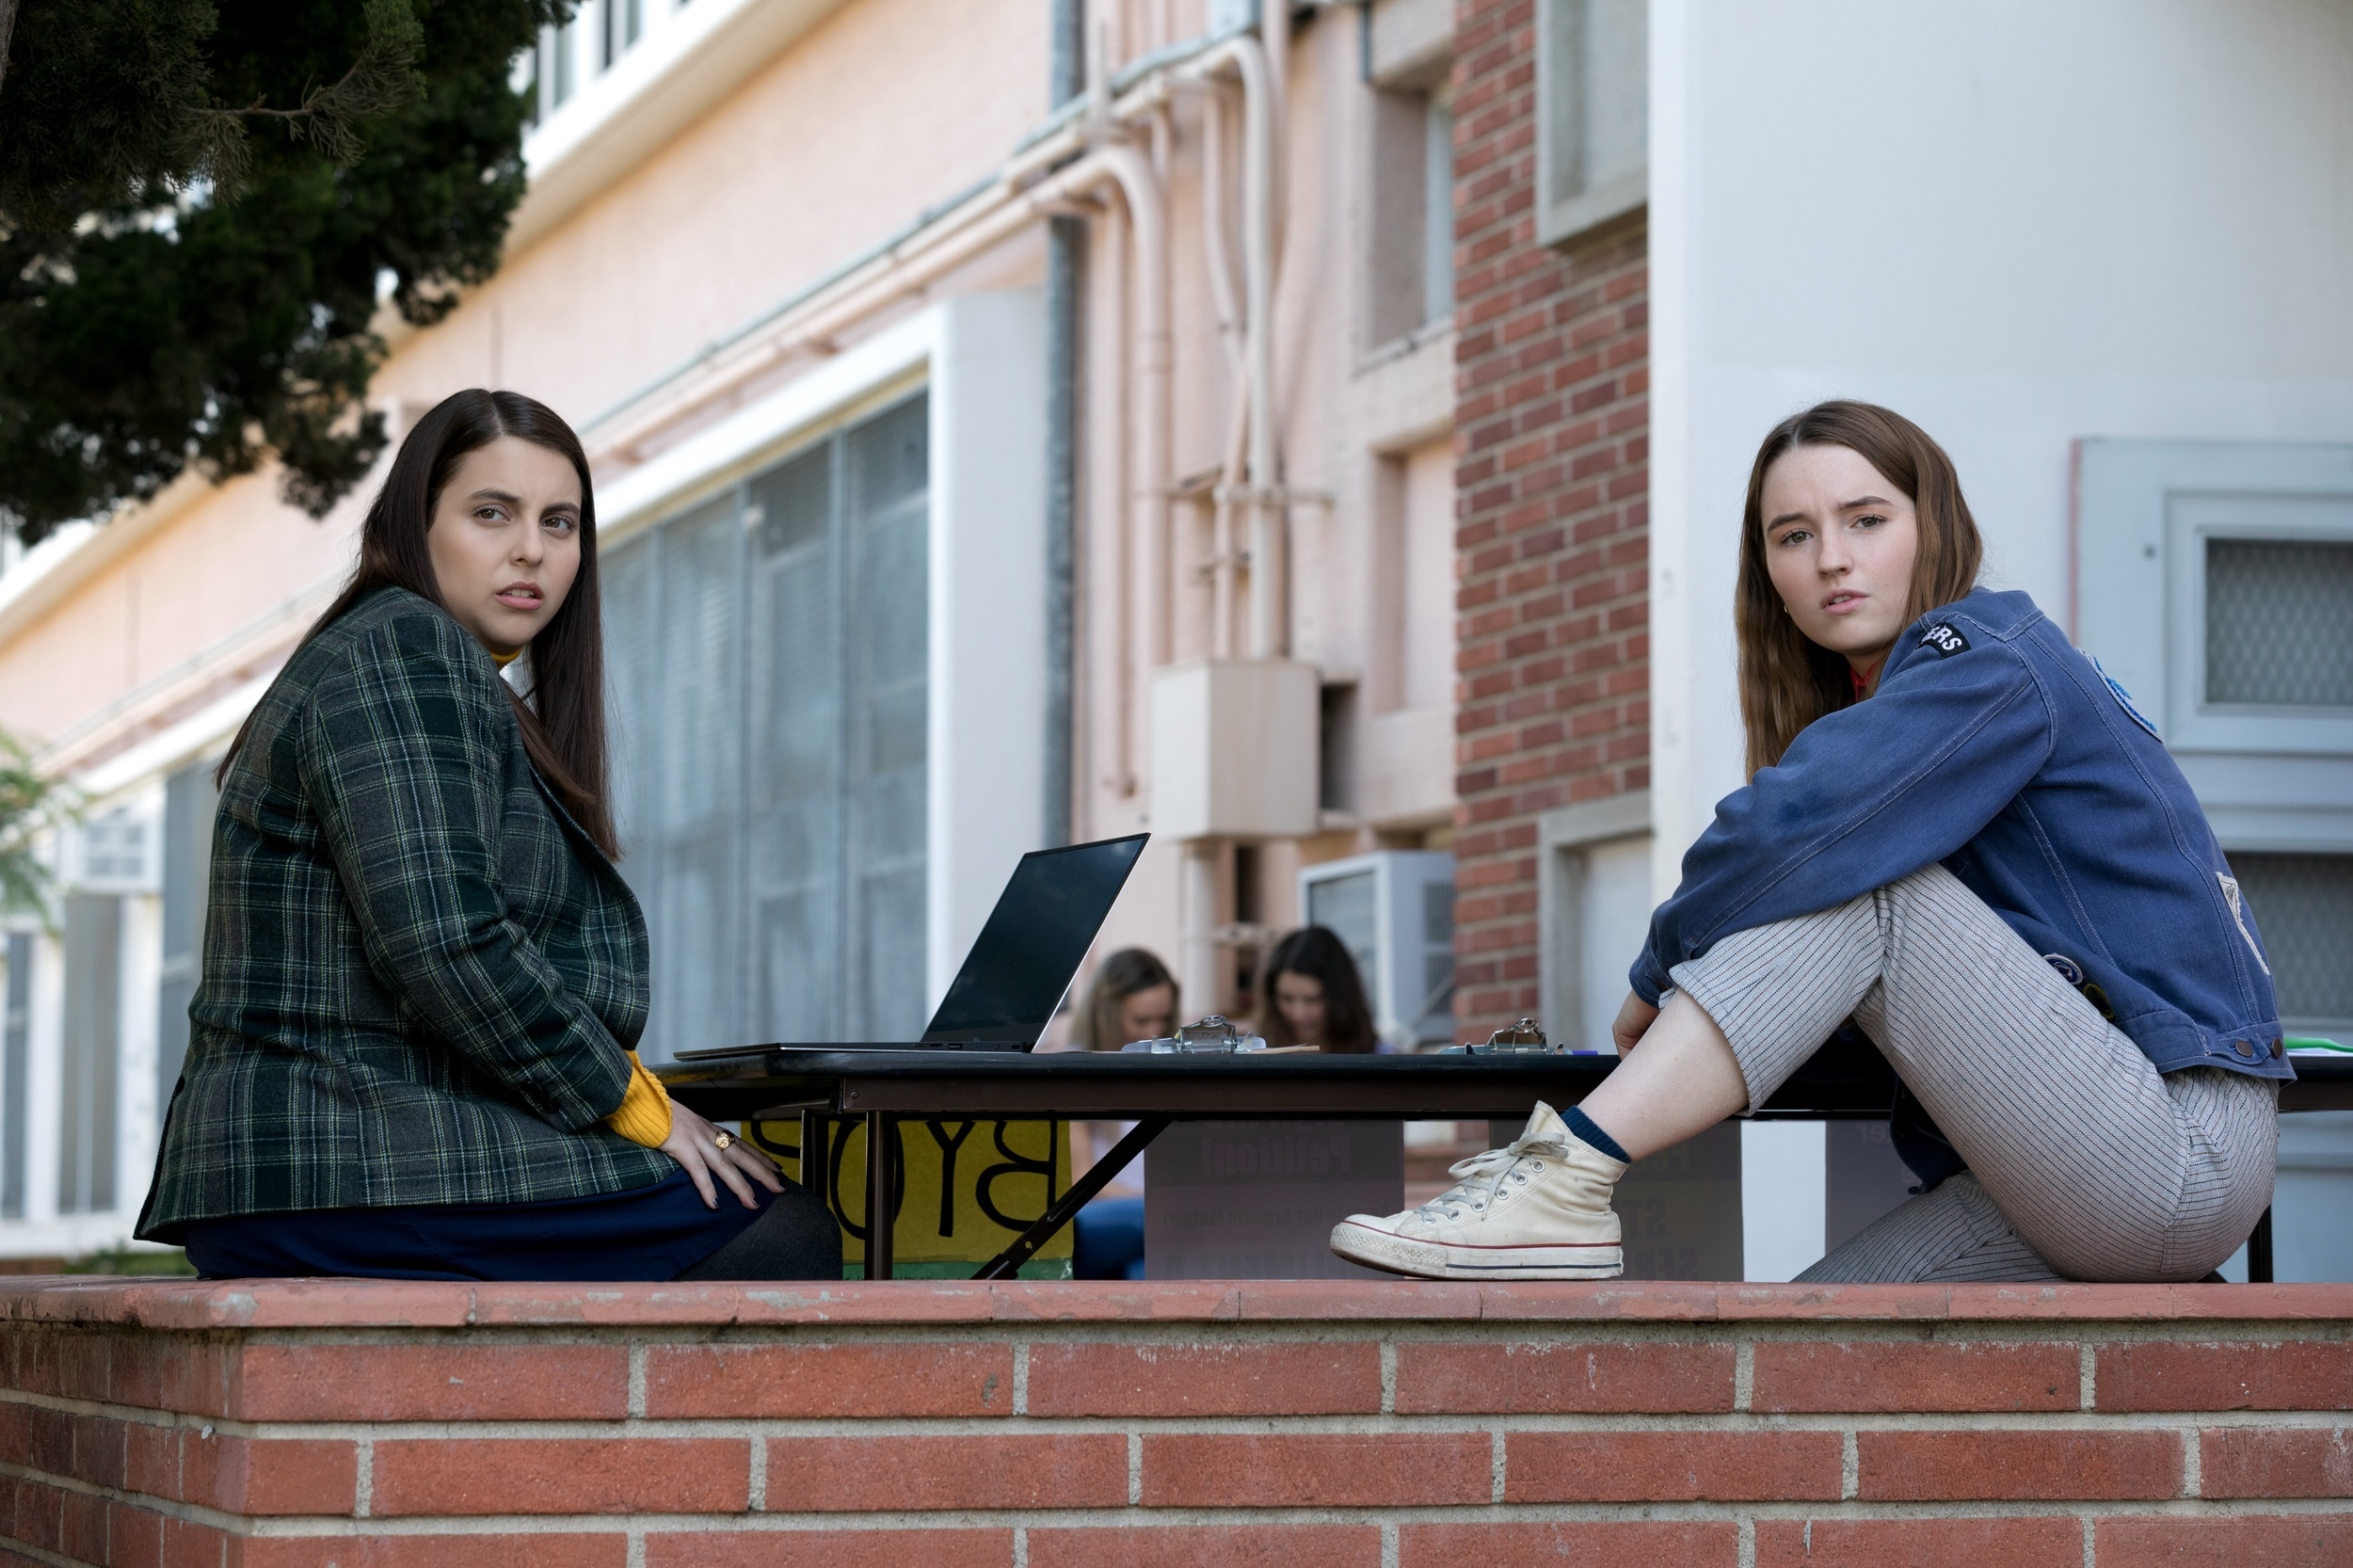 <p>This is Olivia Wilde's directorial debut, and it's a good one. On the eve of graduation from high school, <a href="https://www.youtube.com/watch?v=Uhd3lo_IWJc">Molly (Beanie Feldstein) and Amy (Kaitlyn Dever<span>) are looking to blow off some steam</span></a><span> like they never have before. Of course, the night goes nowhere near as expected, and their longtime friendship is challenged. Dever, best known for her time on Tim Allen's <em>Last Man Standing</em>, is the true star of this film.</span></p>